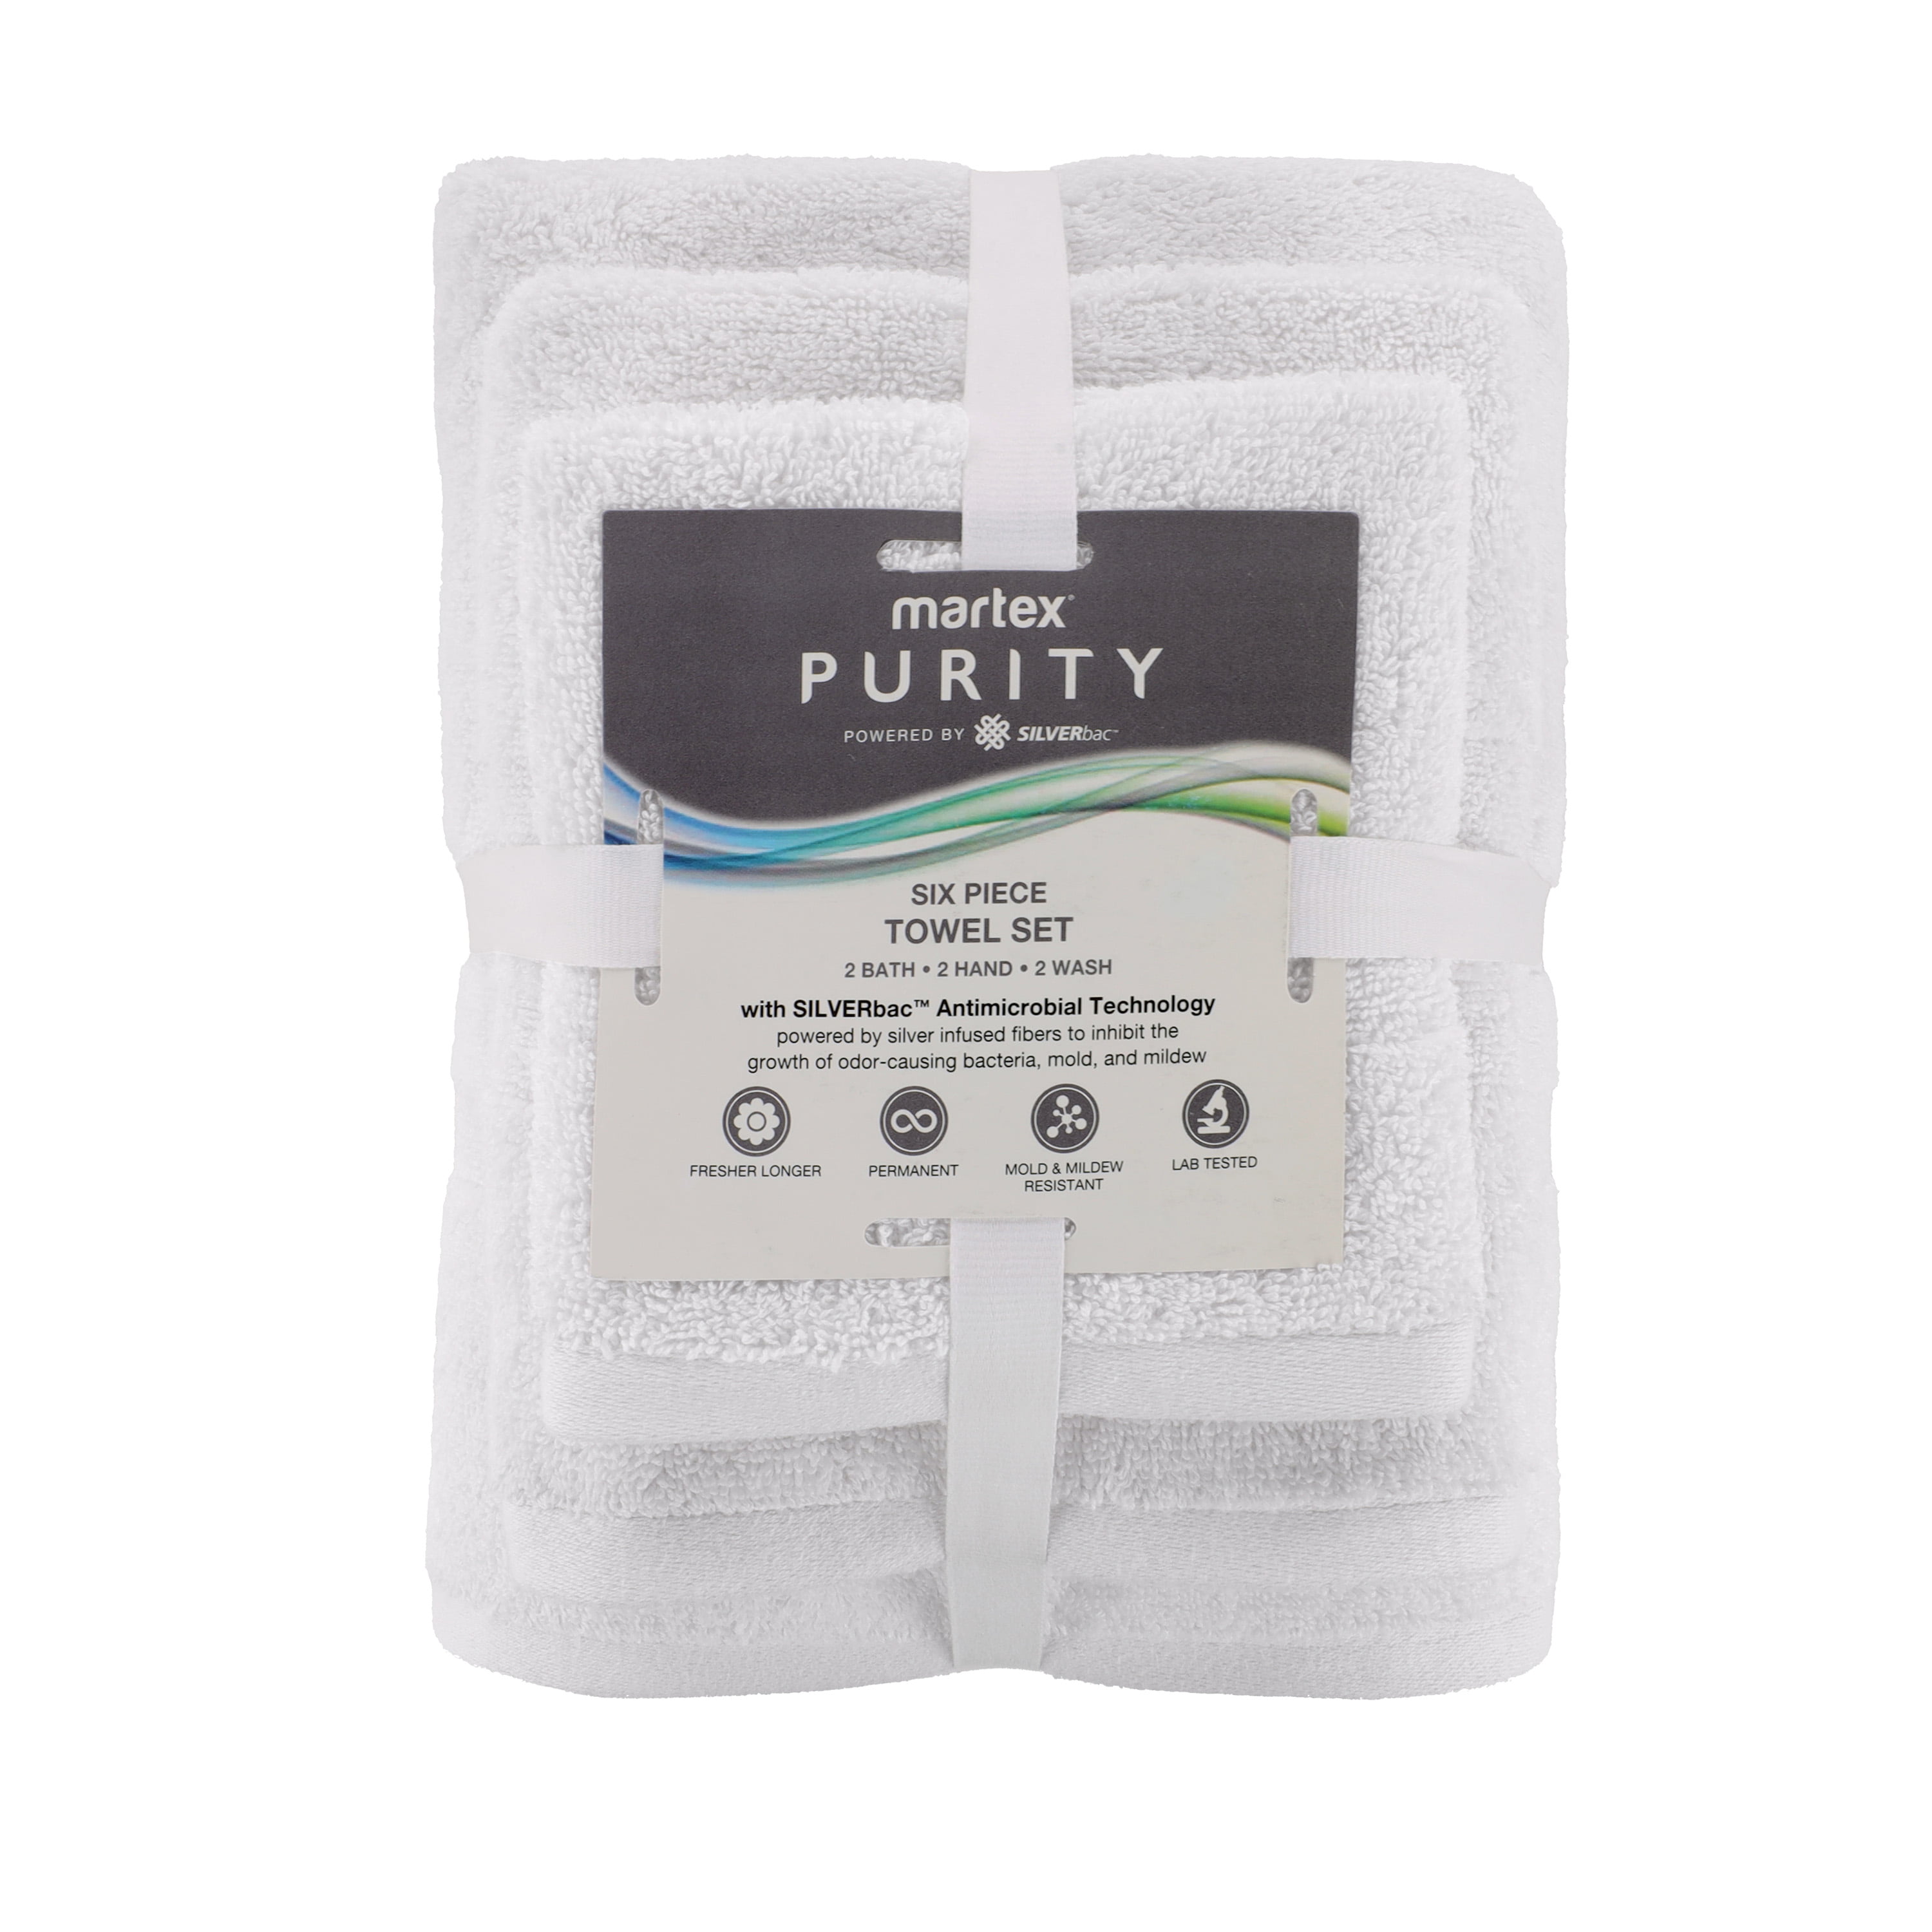 Our Six-Piece Striped Trim Towel Set from Mandalay Bay Resort